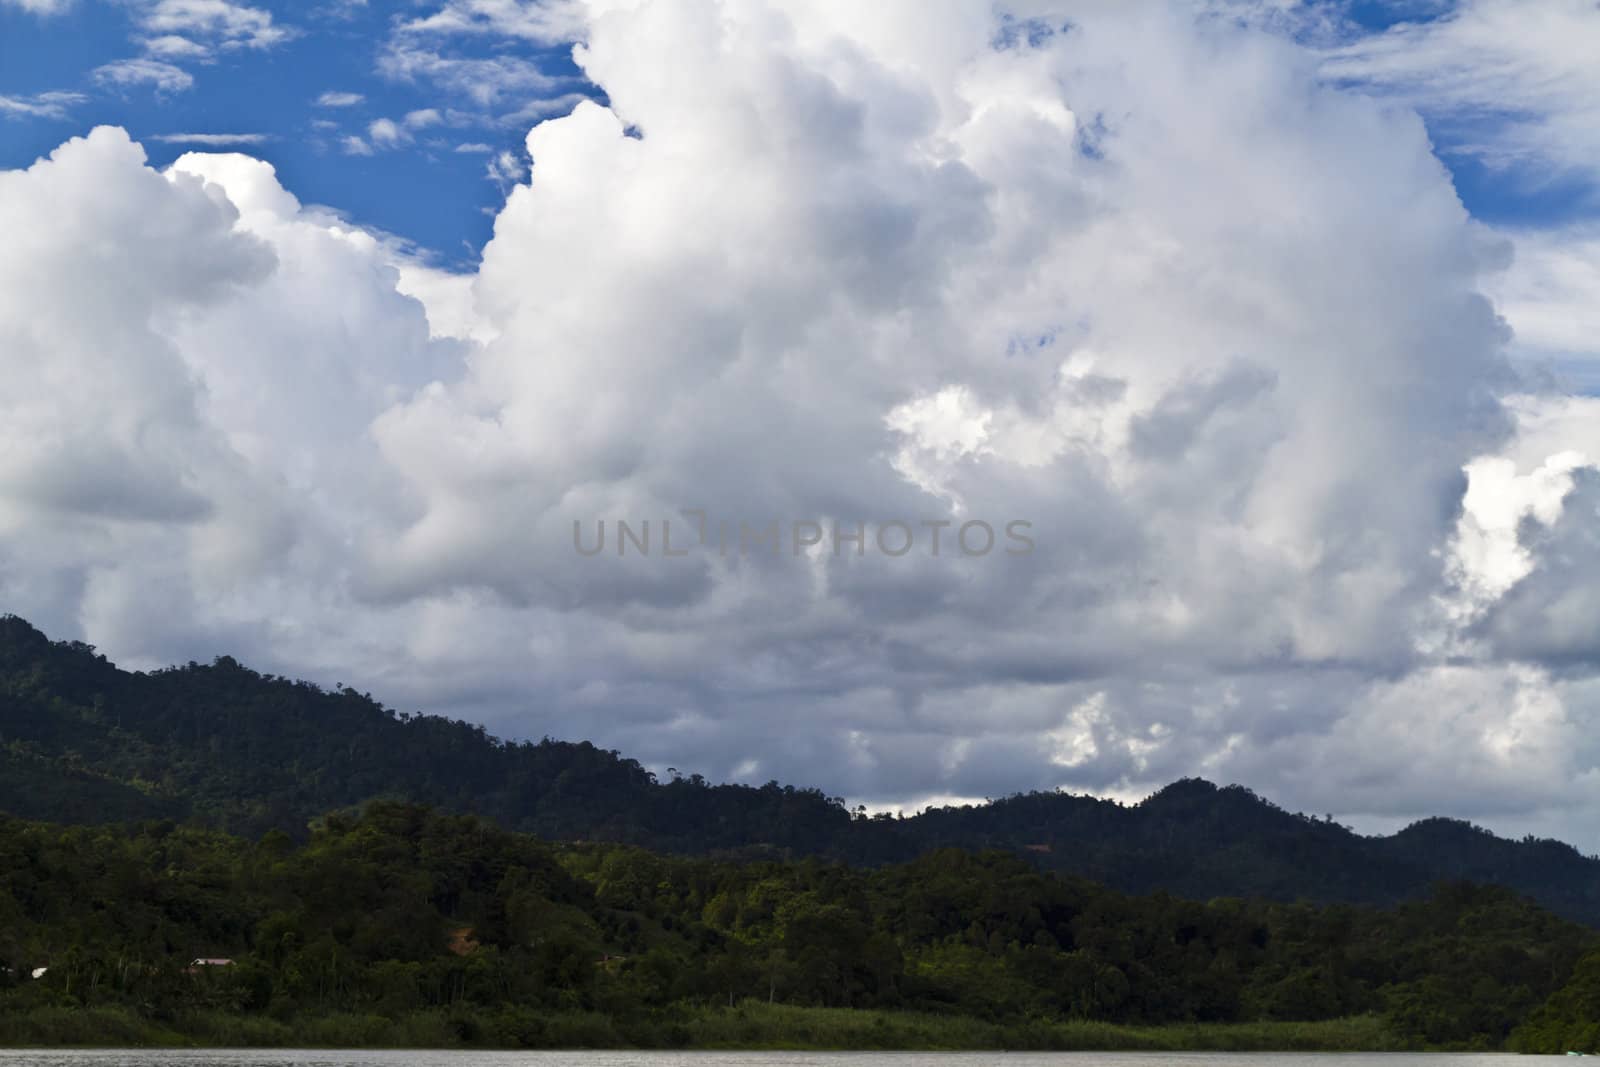 view of highlands from Rajang River in Sarawak, Malaysia with clouds forming in the background